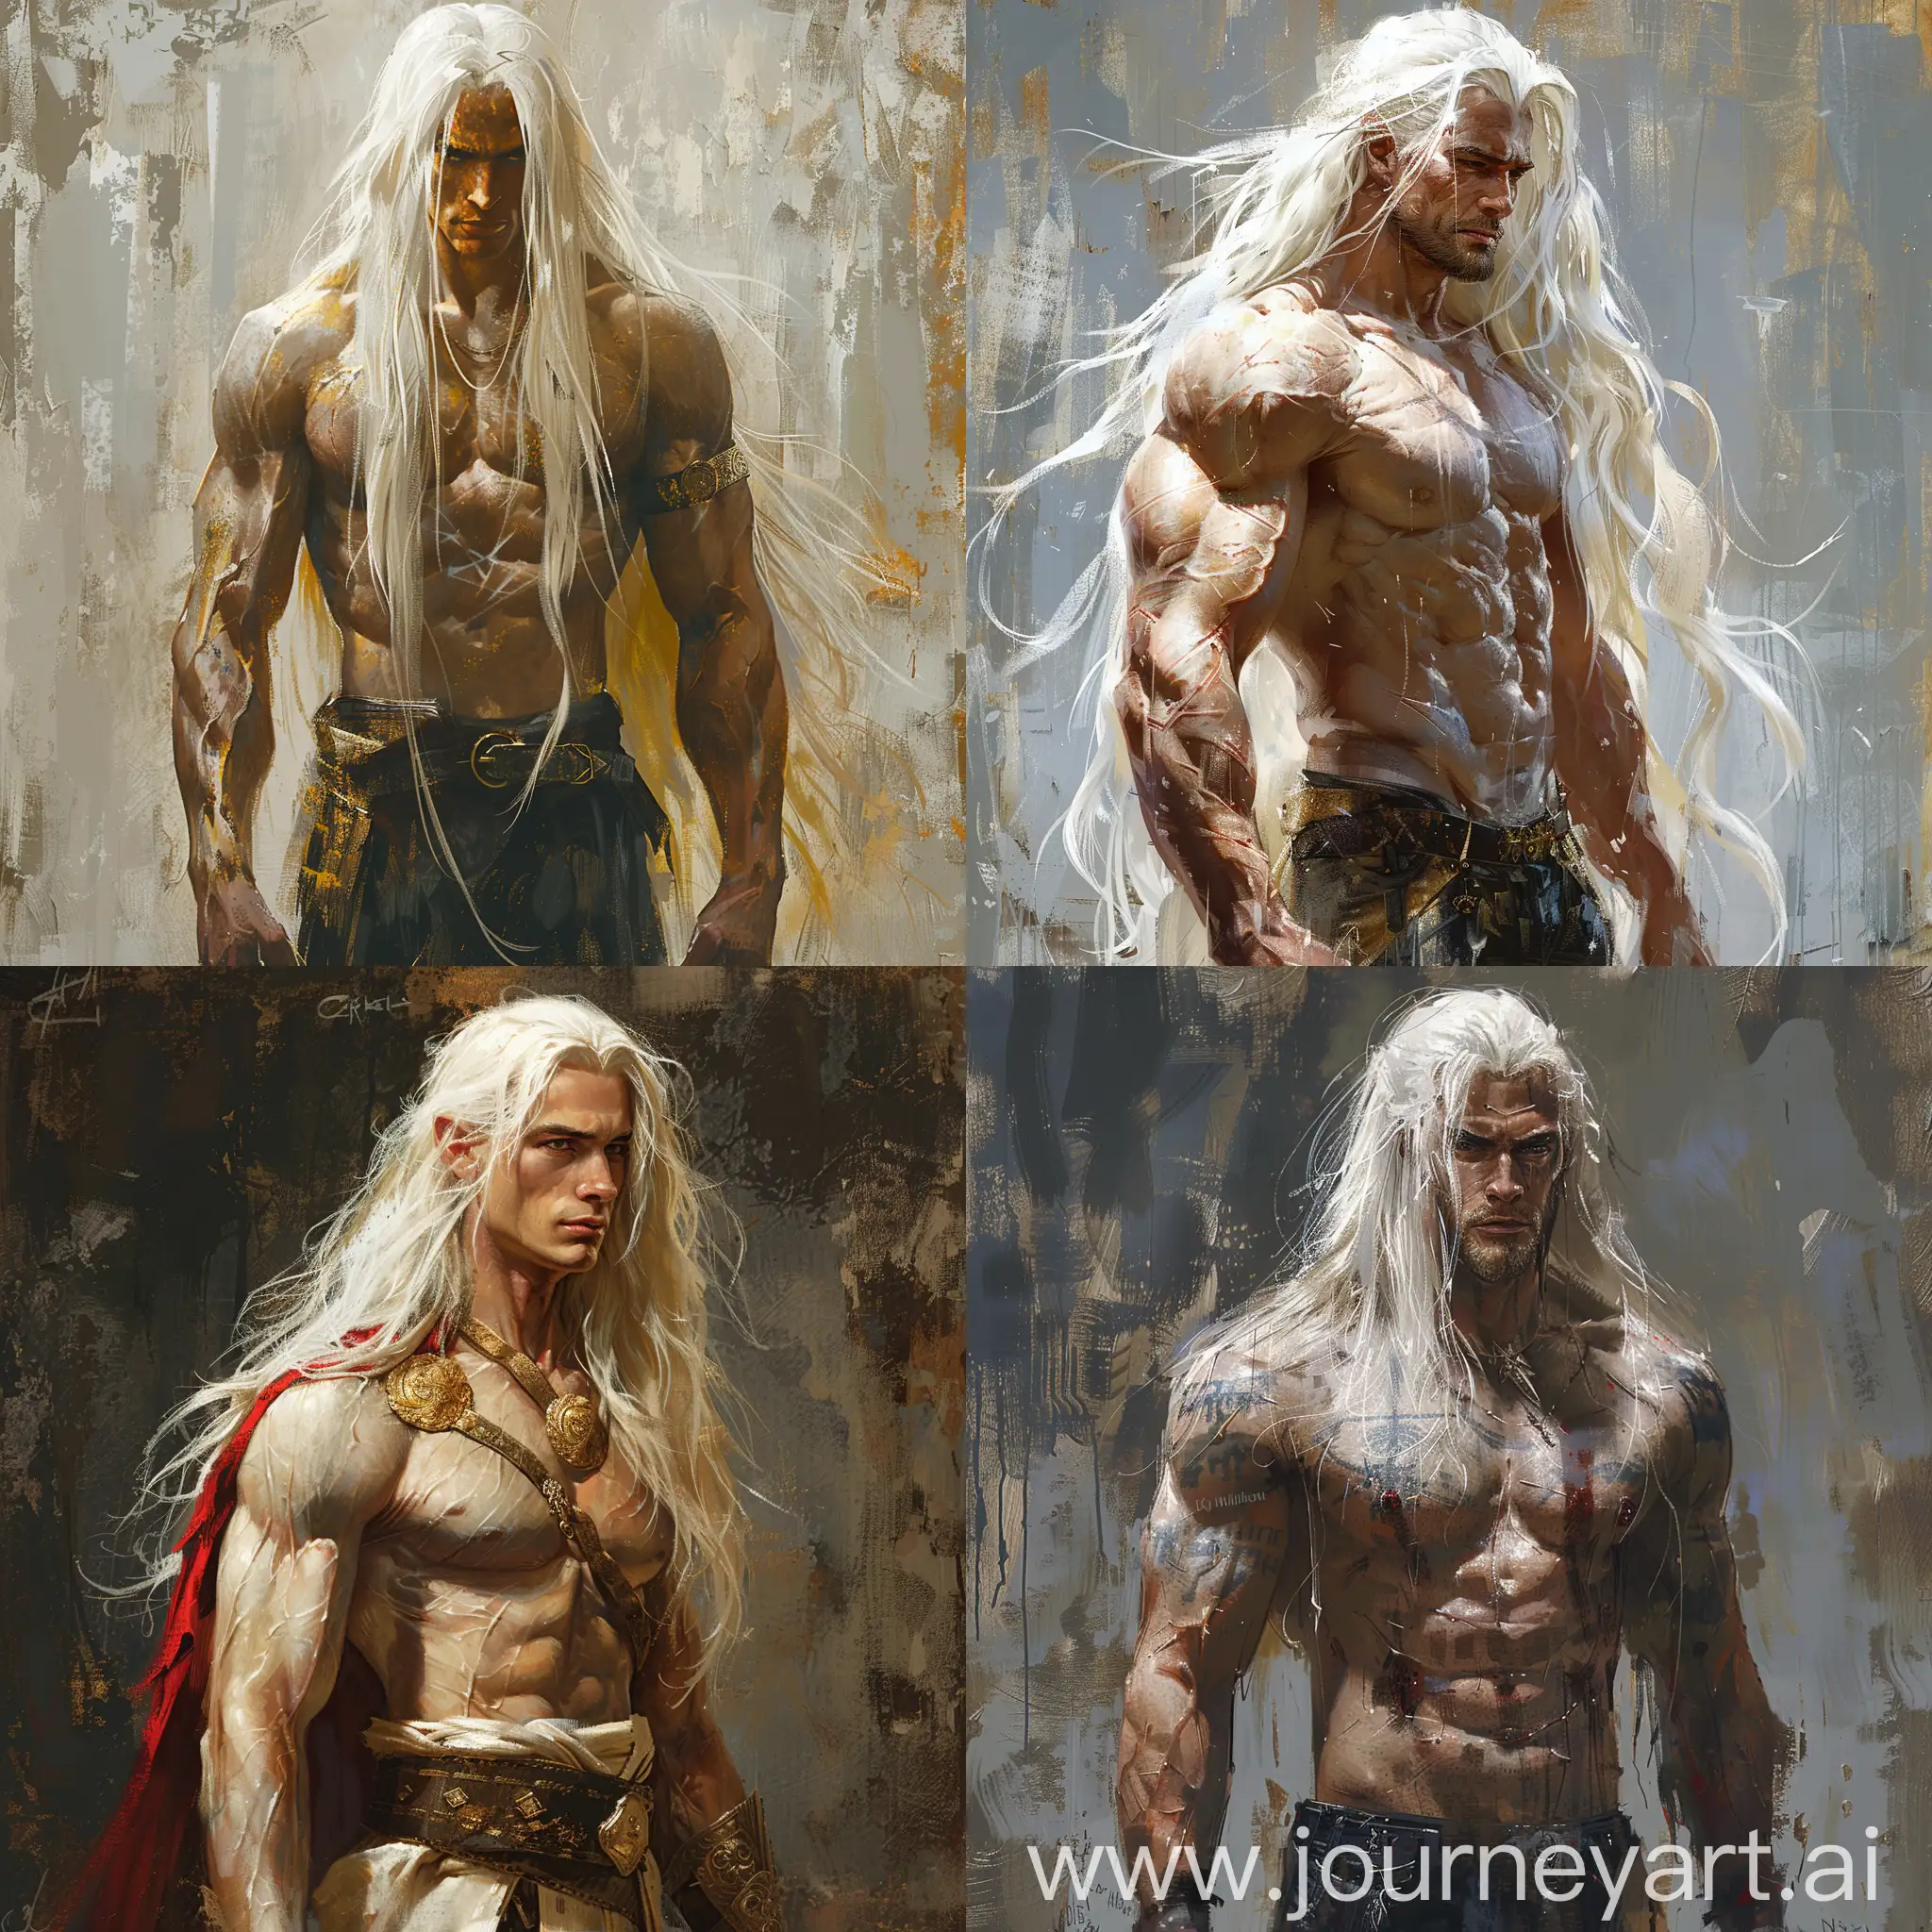 Subject: a Warrior of Warrior s; skin Purer than gold, long white hair, muscular, emanates power that can rewrite infinities. Style/coloring: extremely realistic painted realism, detailed digital painting concept art, detailed painting by Gaston Bussière, Craig Mullins. A mystical, dreamlike portrait in a cinematic style, Ed Emsh, Virgil Finlay, Norman Saunders, Hubert Rogers, Earle Bergey, Kelly Freas --upbeta --s 250 --v 6 --